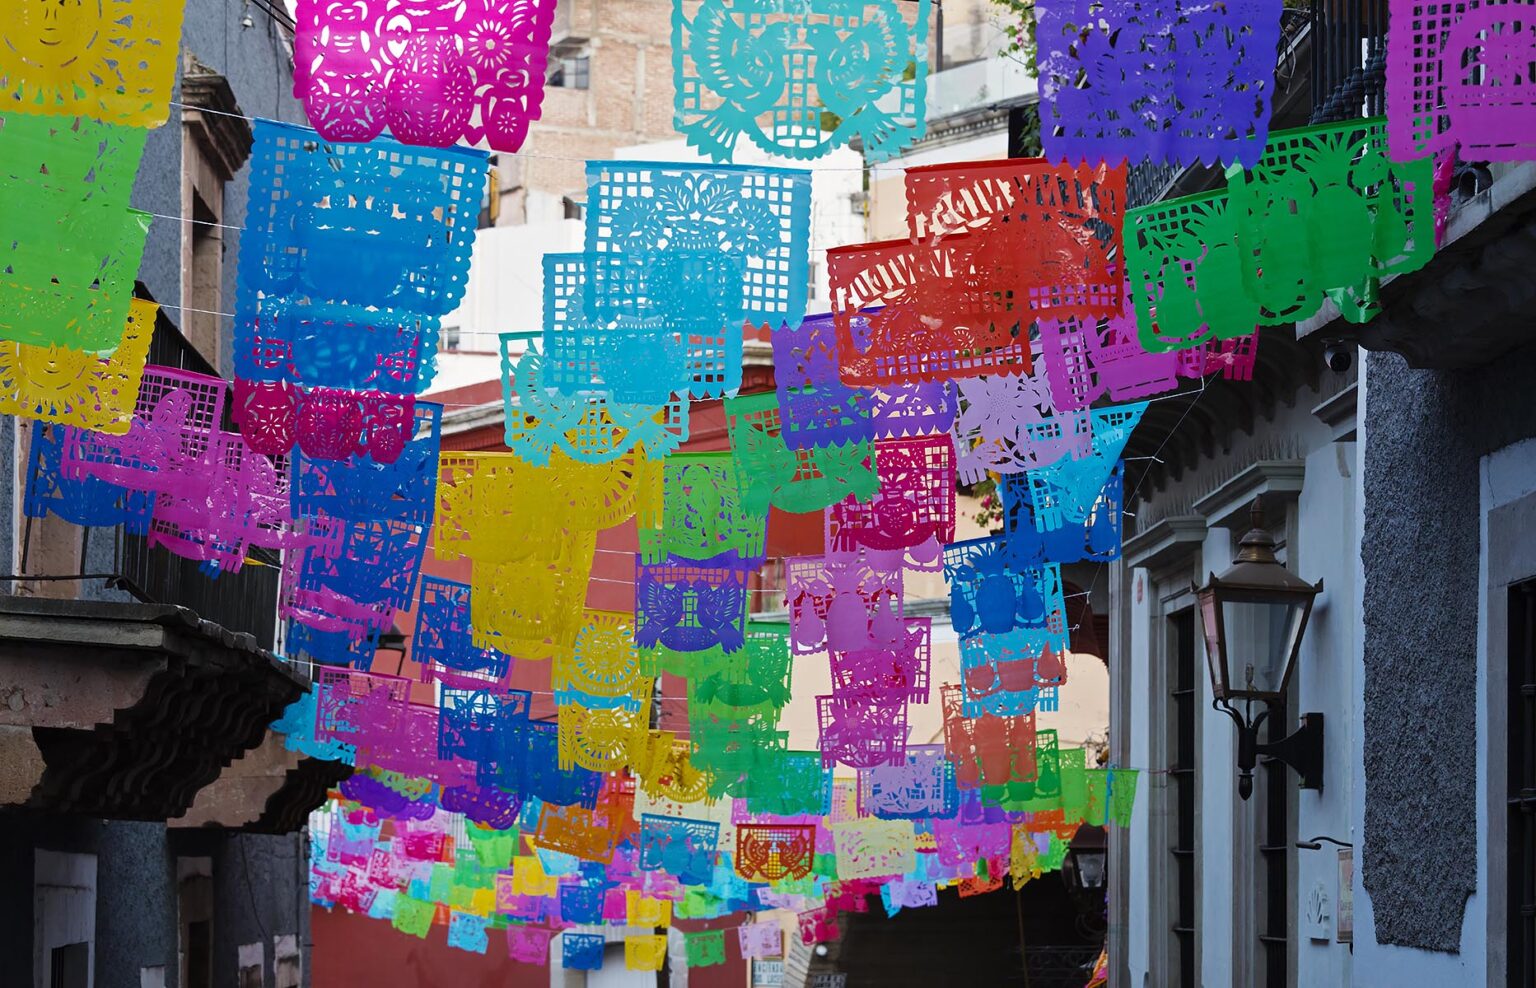 Paper cutout flags decorate the streets during EASTER WEEK - GUANAJUATO, MEXICO